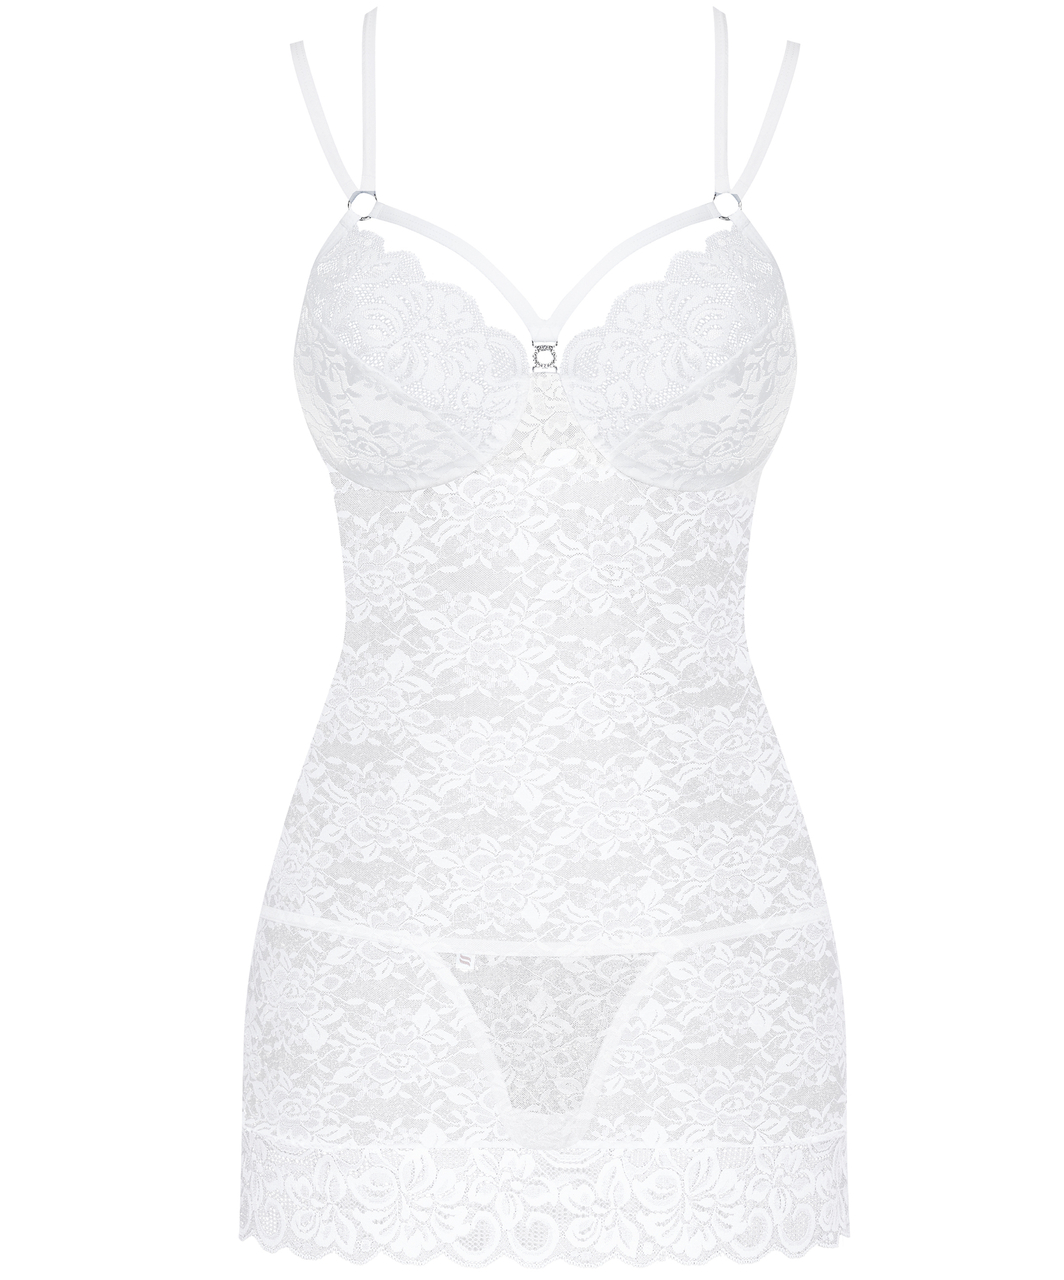 Obsessive white lace open back chemise